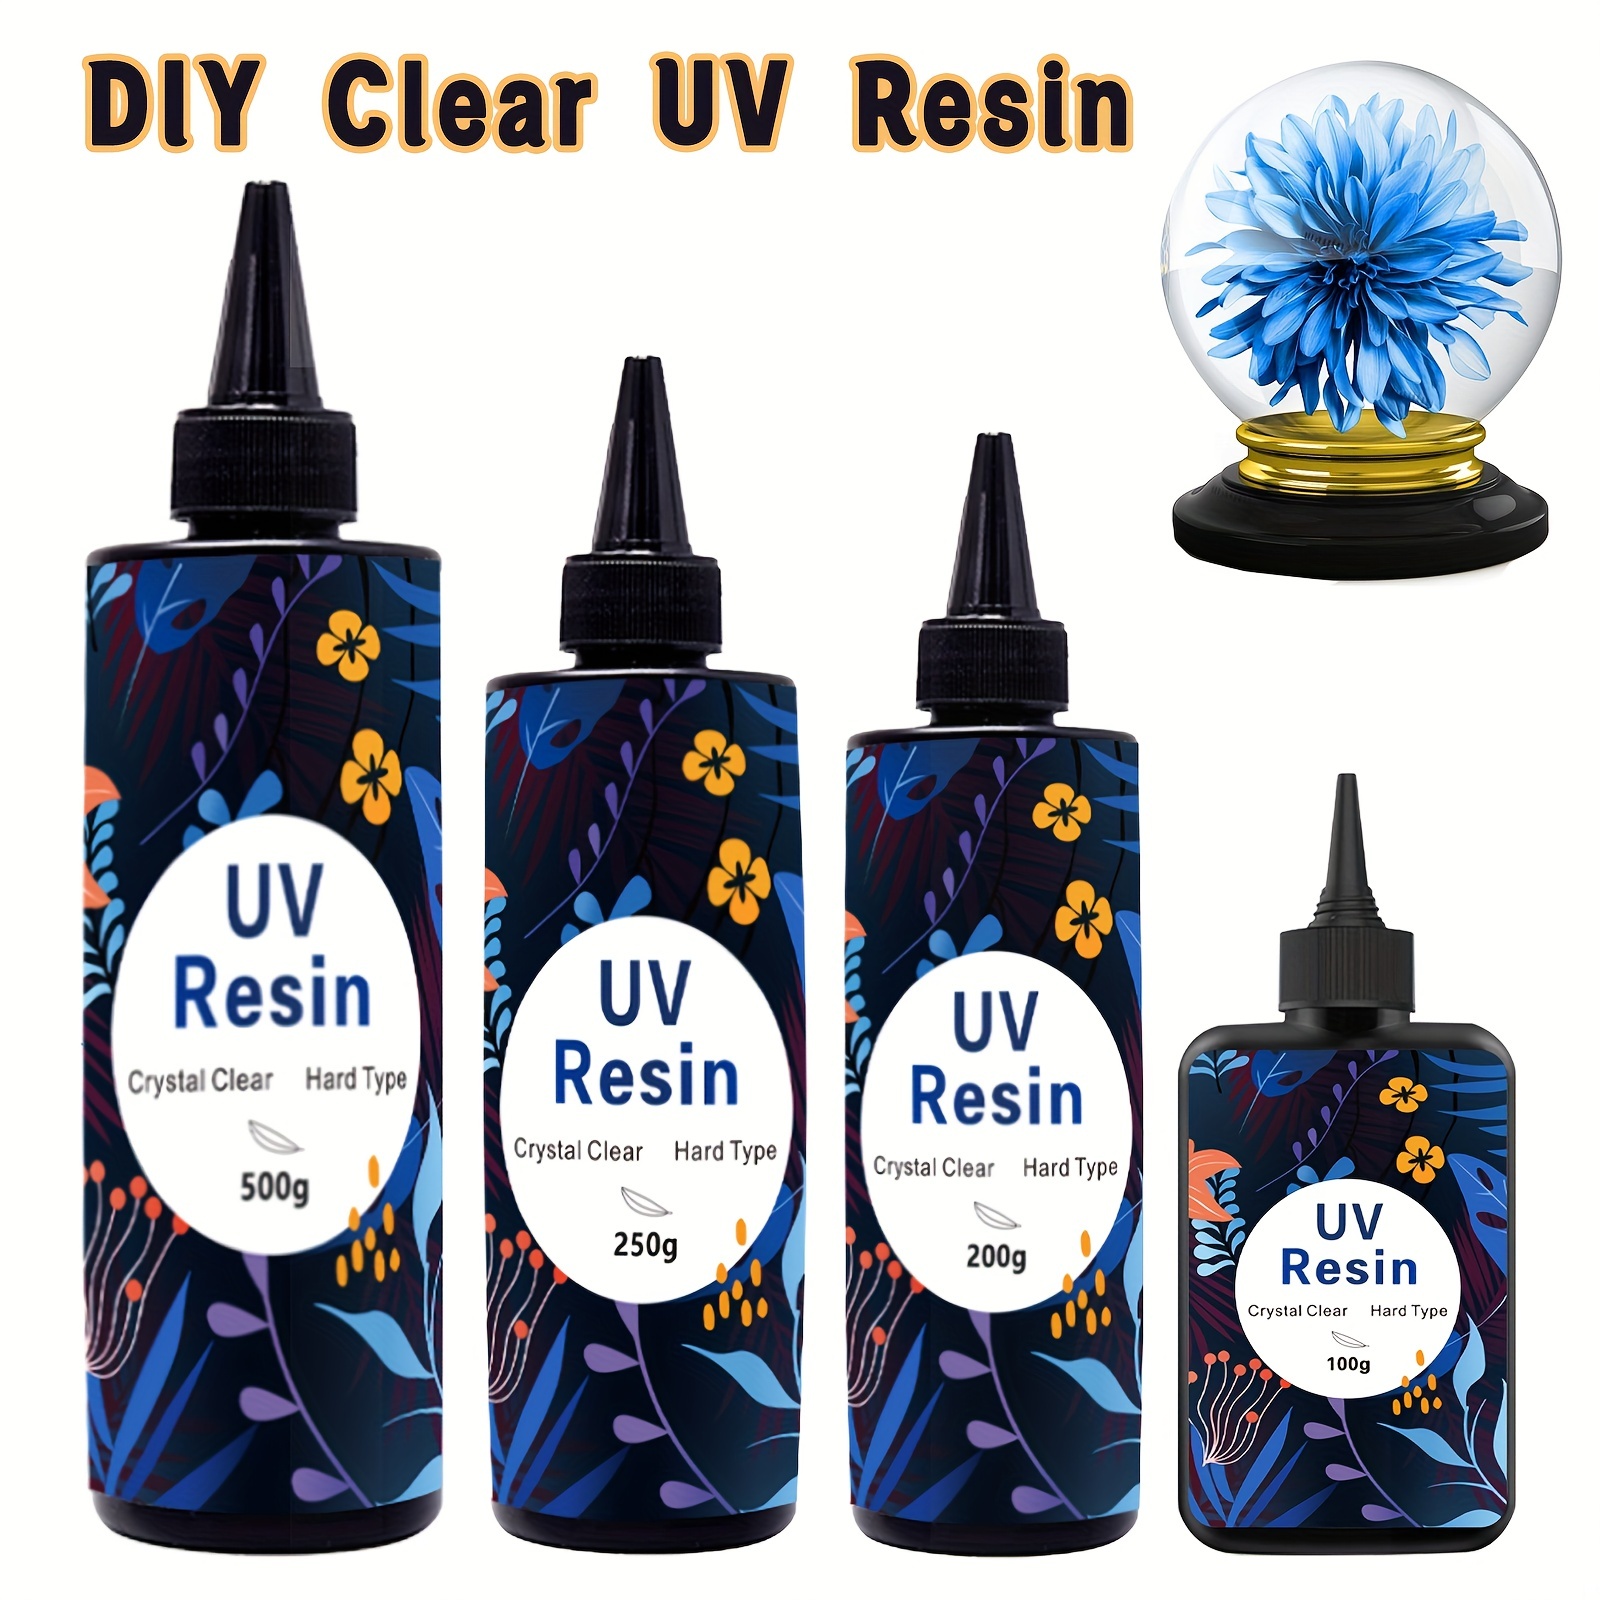 Hard UV Resin Glue Crystal Clear Ultraviolet Fast Curing Epoxy Resin Solar  Cure Sunlight Activated for DIY Jewelry Making Tools